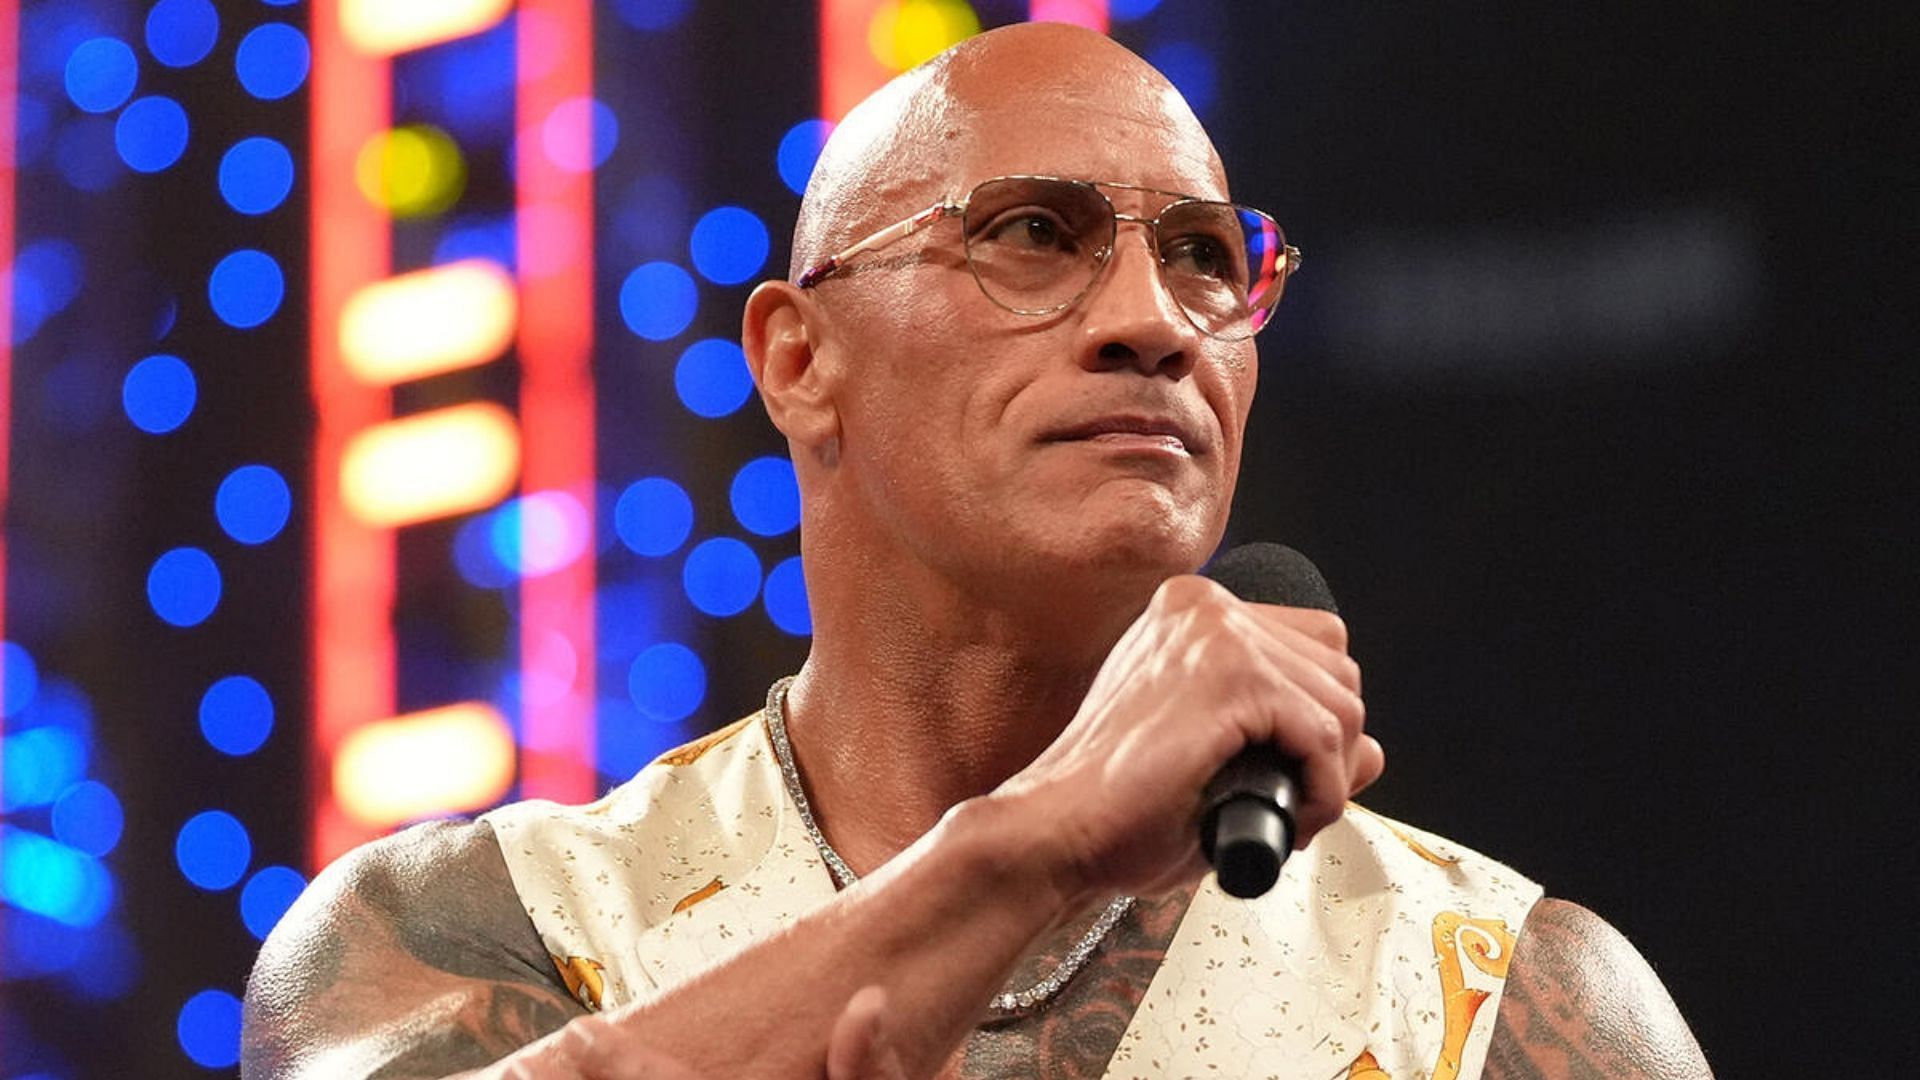 The Rock is a former multi-time WWE Champion